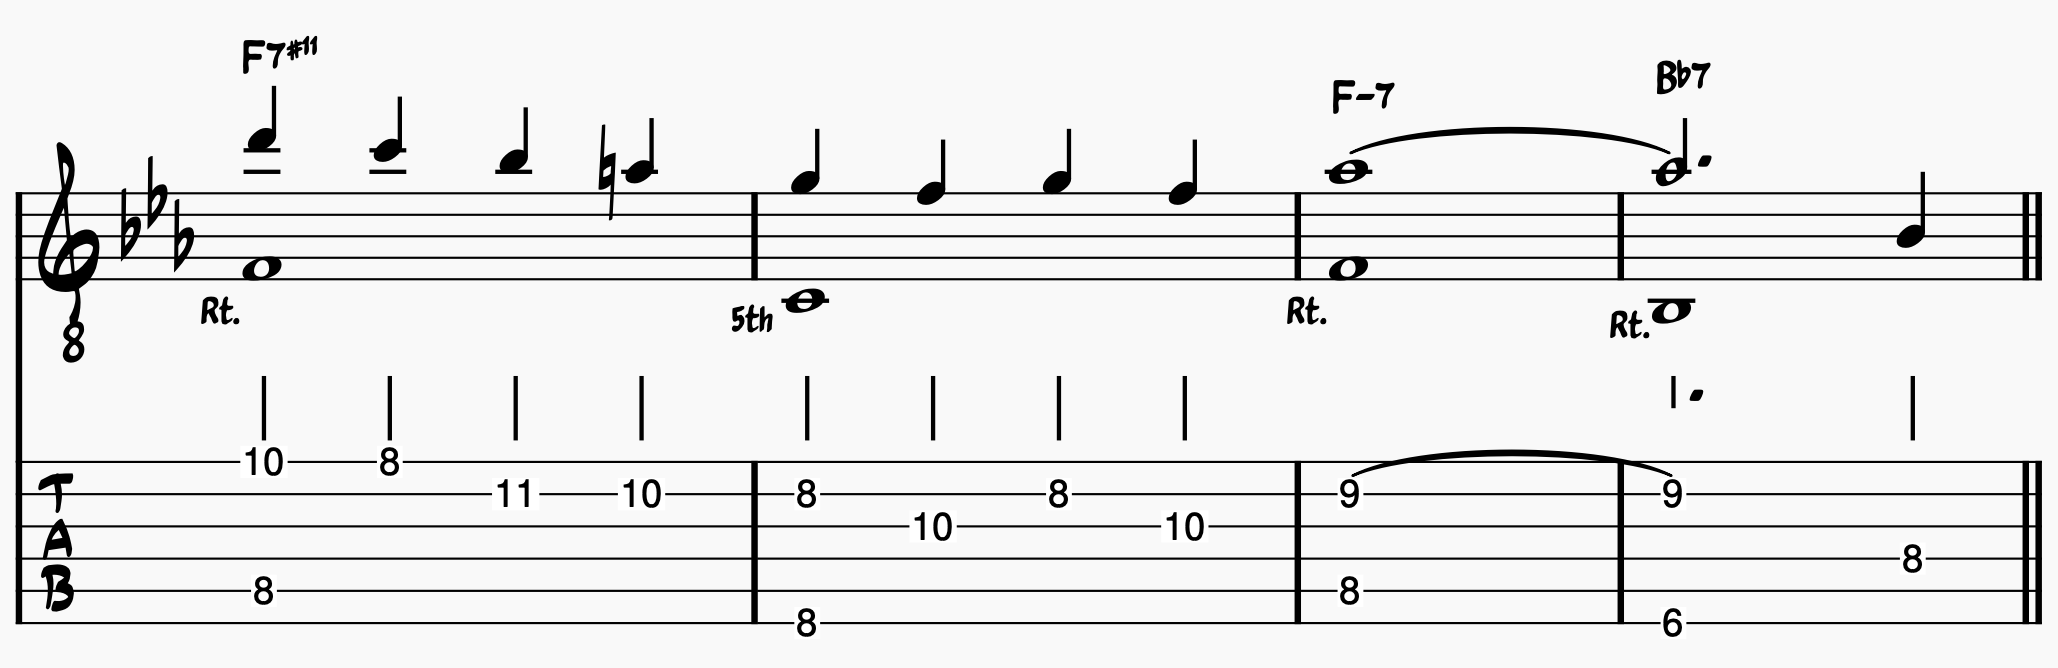 Chord Melody Guitar: There Will Never Be Another You Melody and Bass Notes Version 2; bars 13-16